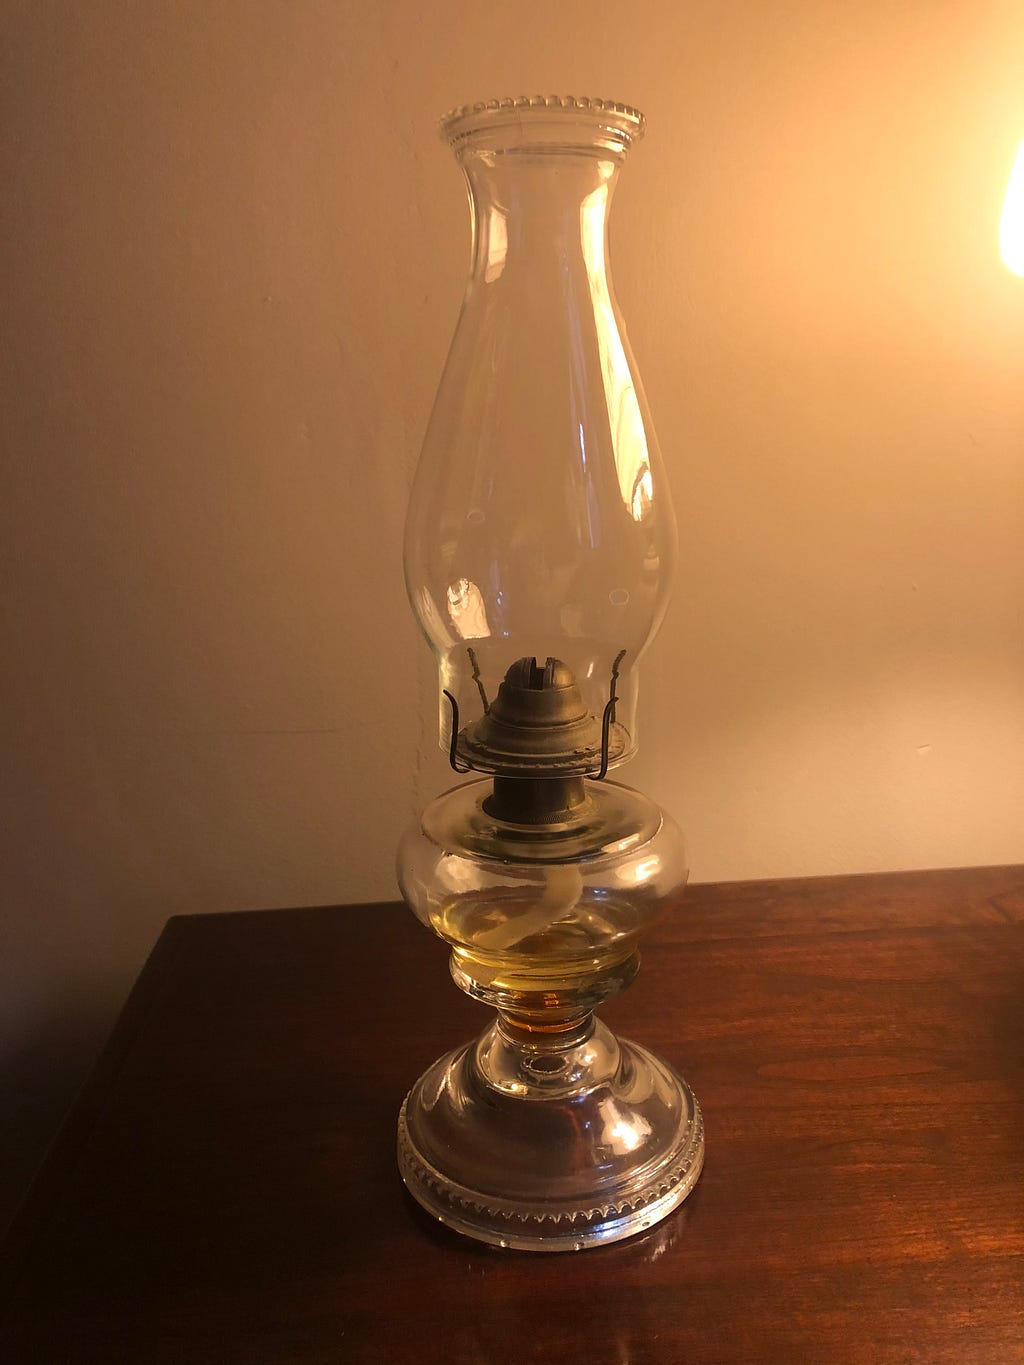 An oil lamp sits on a dark wood table against a neutral-colored while.